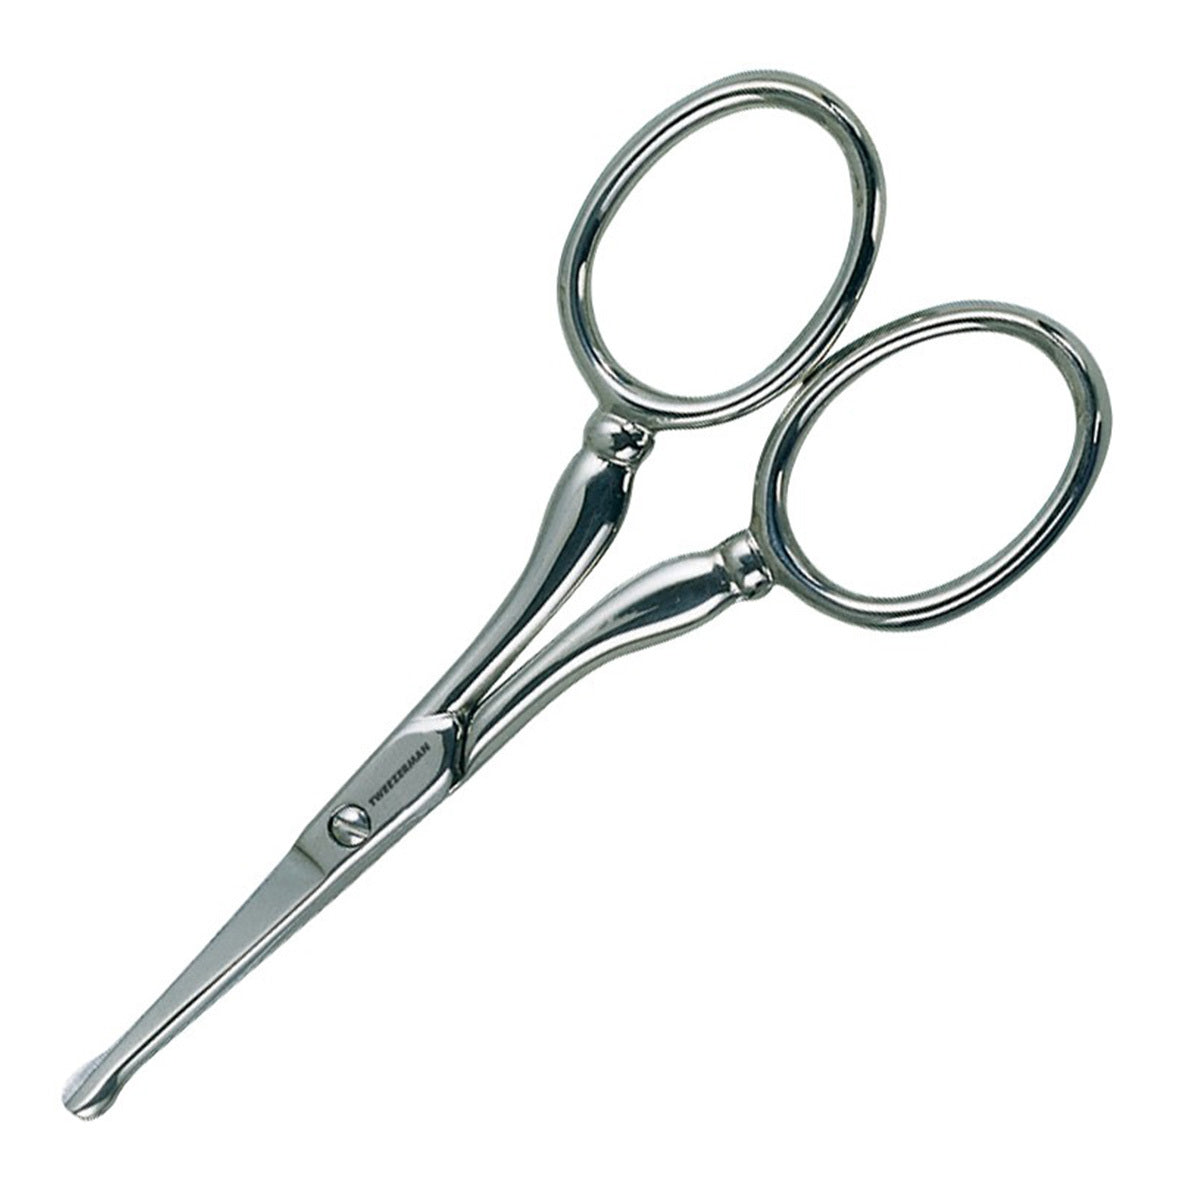 Primary image of Nickel-Plated Facial Hair Scissors